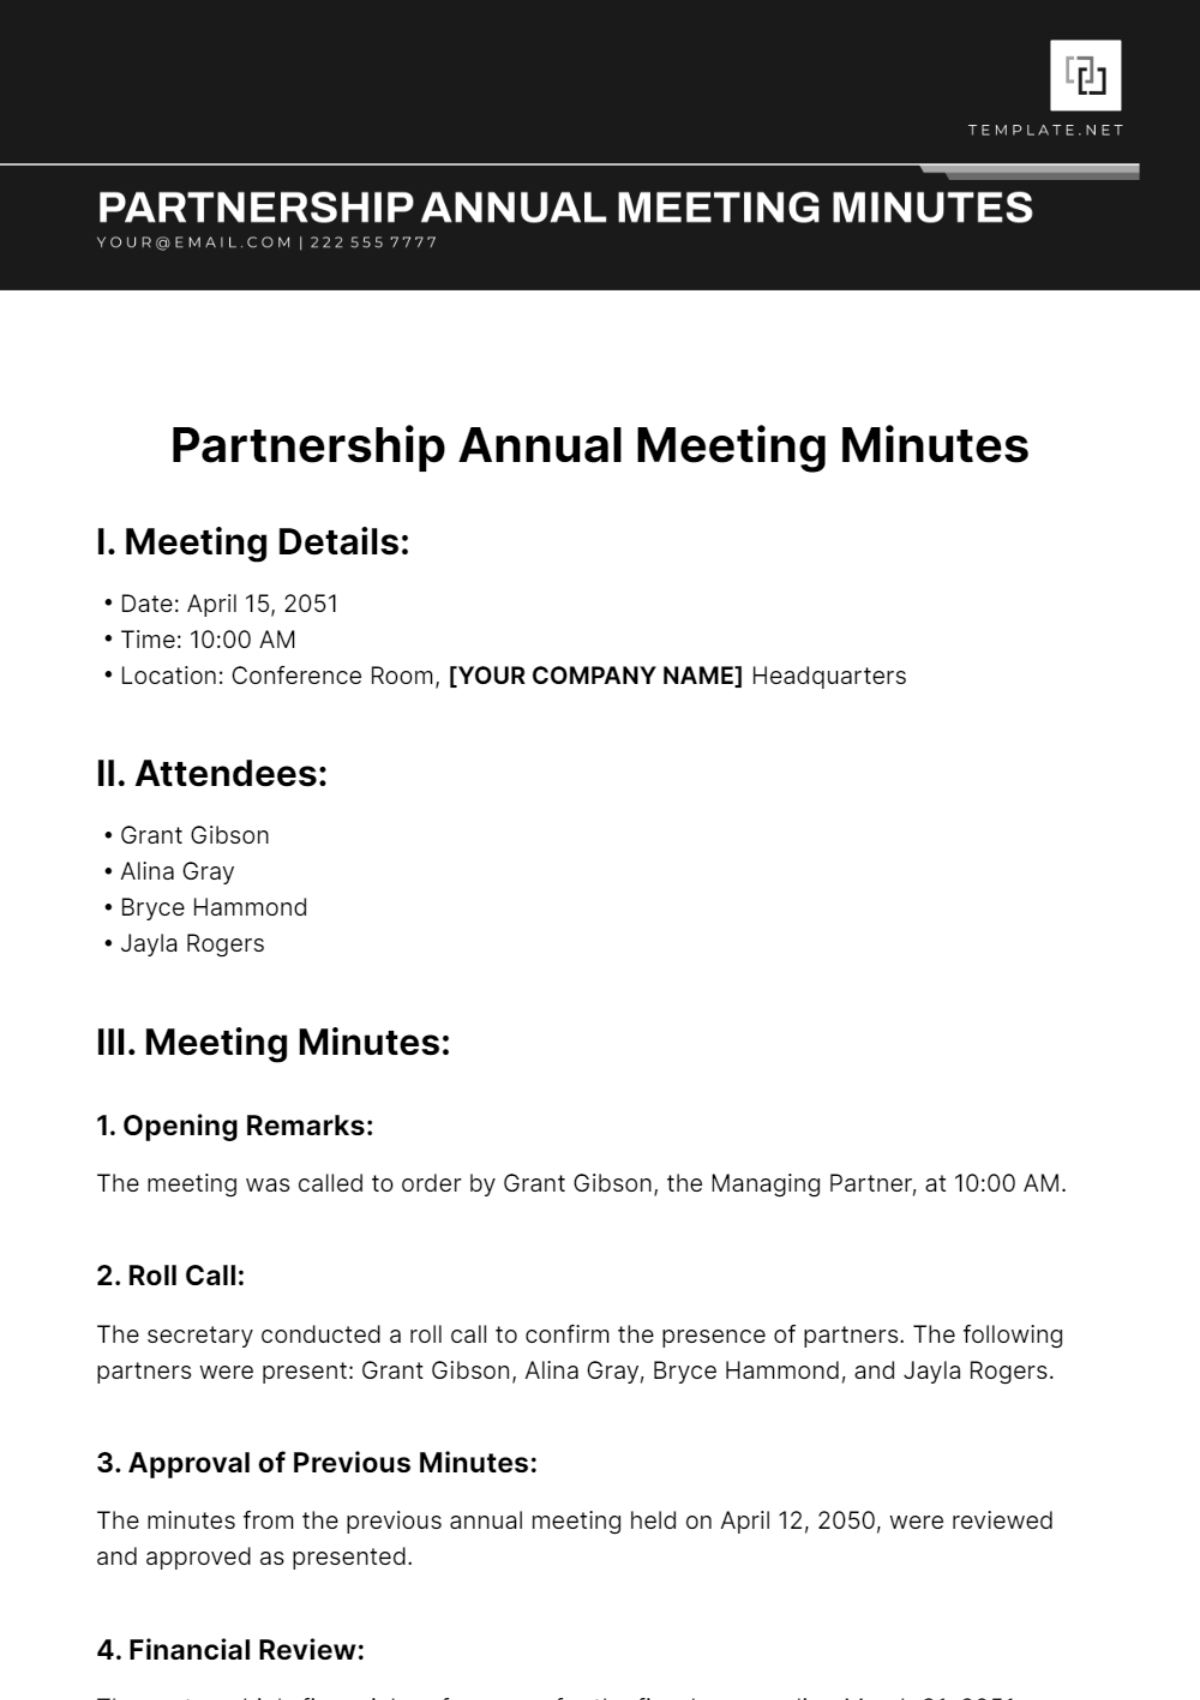 Partnership Annual Meeting Minutes Template